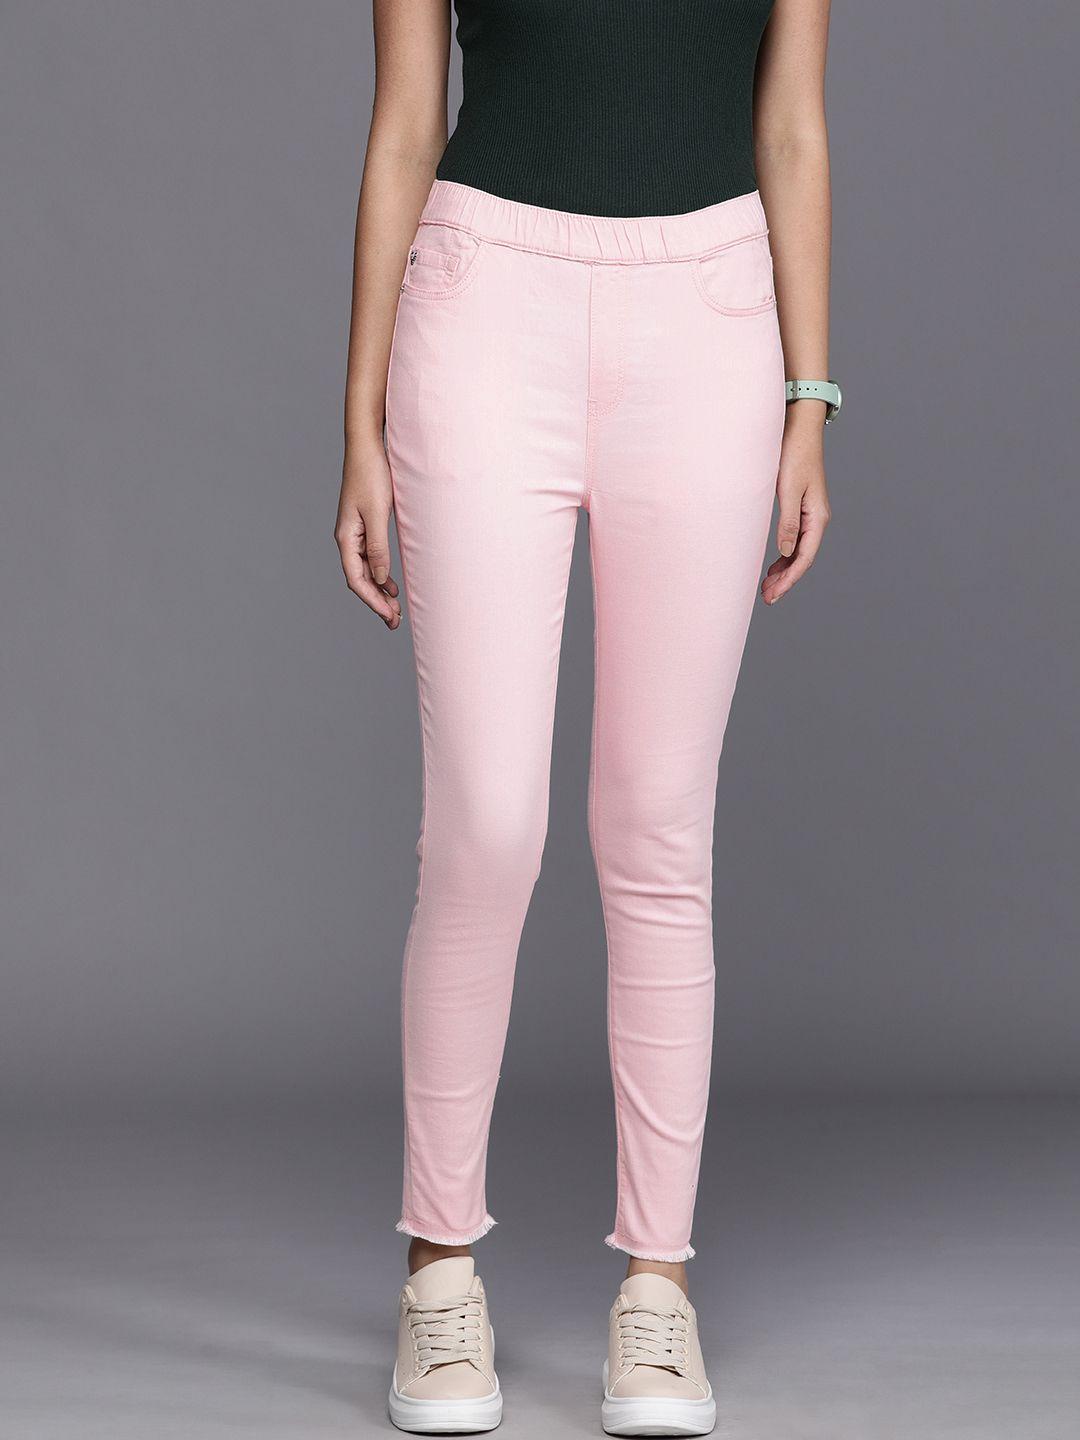 allen-solly-woman-pink-skinny-fit-high-rise-frayed-jeggings